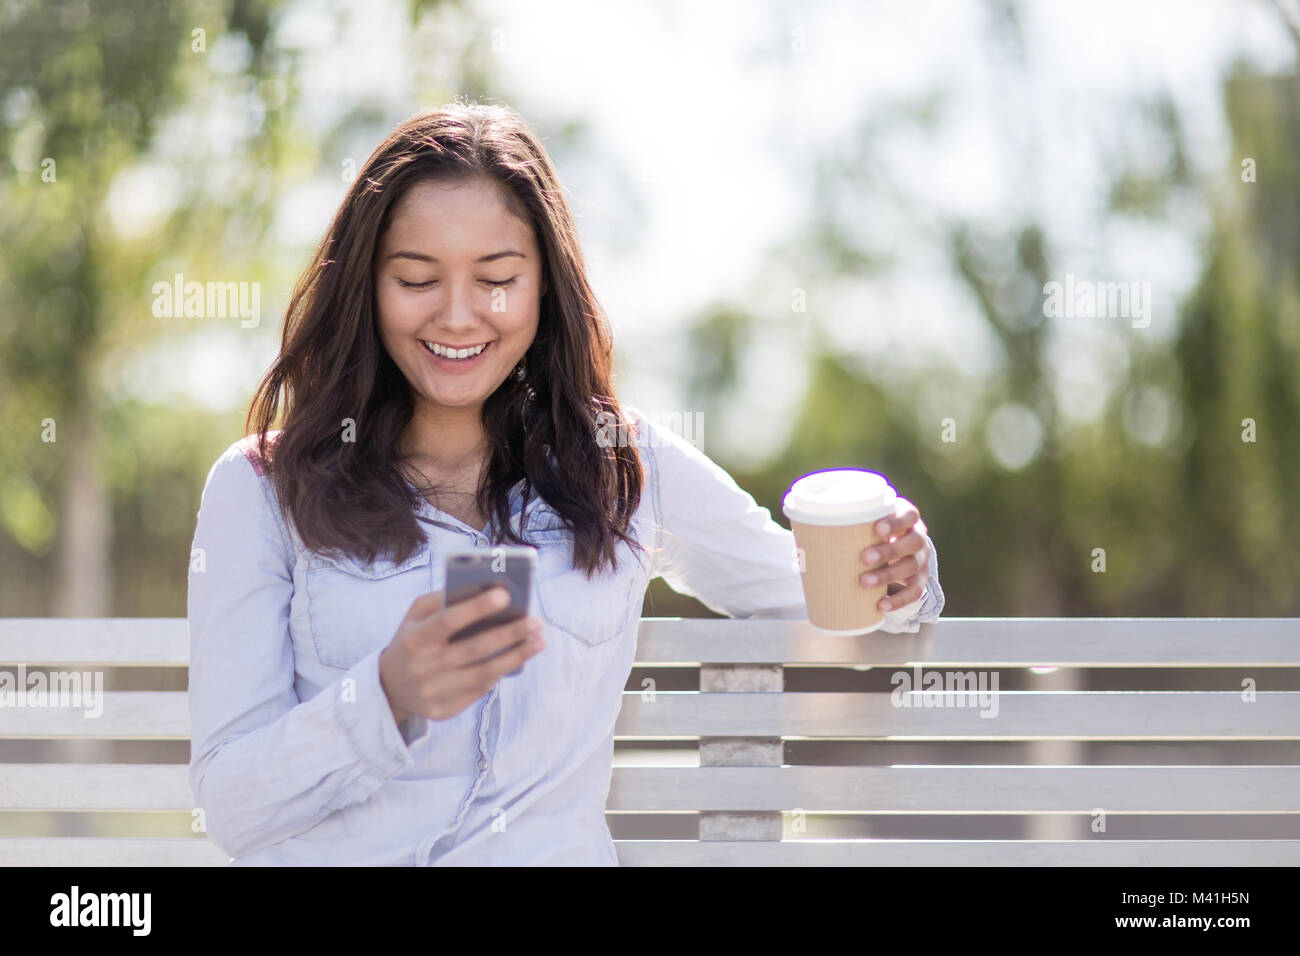 Woman sitting on bench checking smartphone Stock Photo